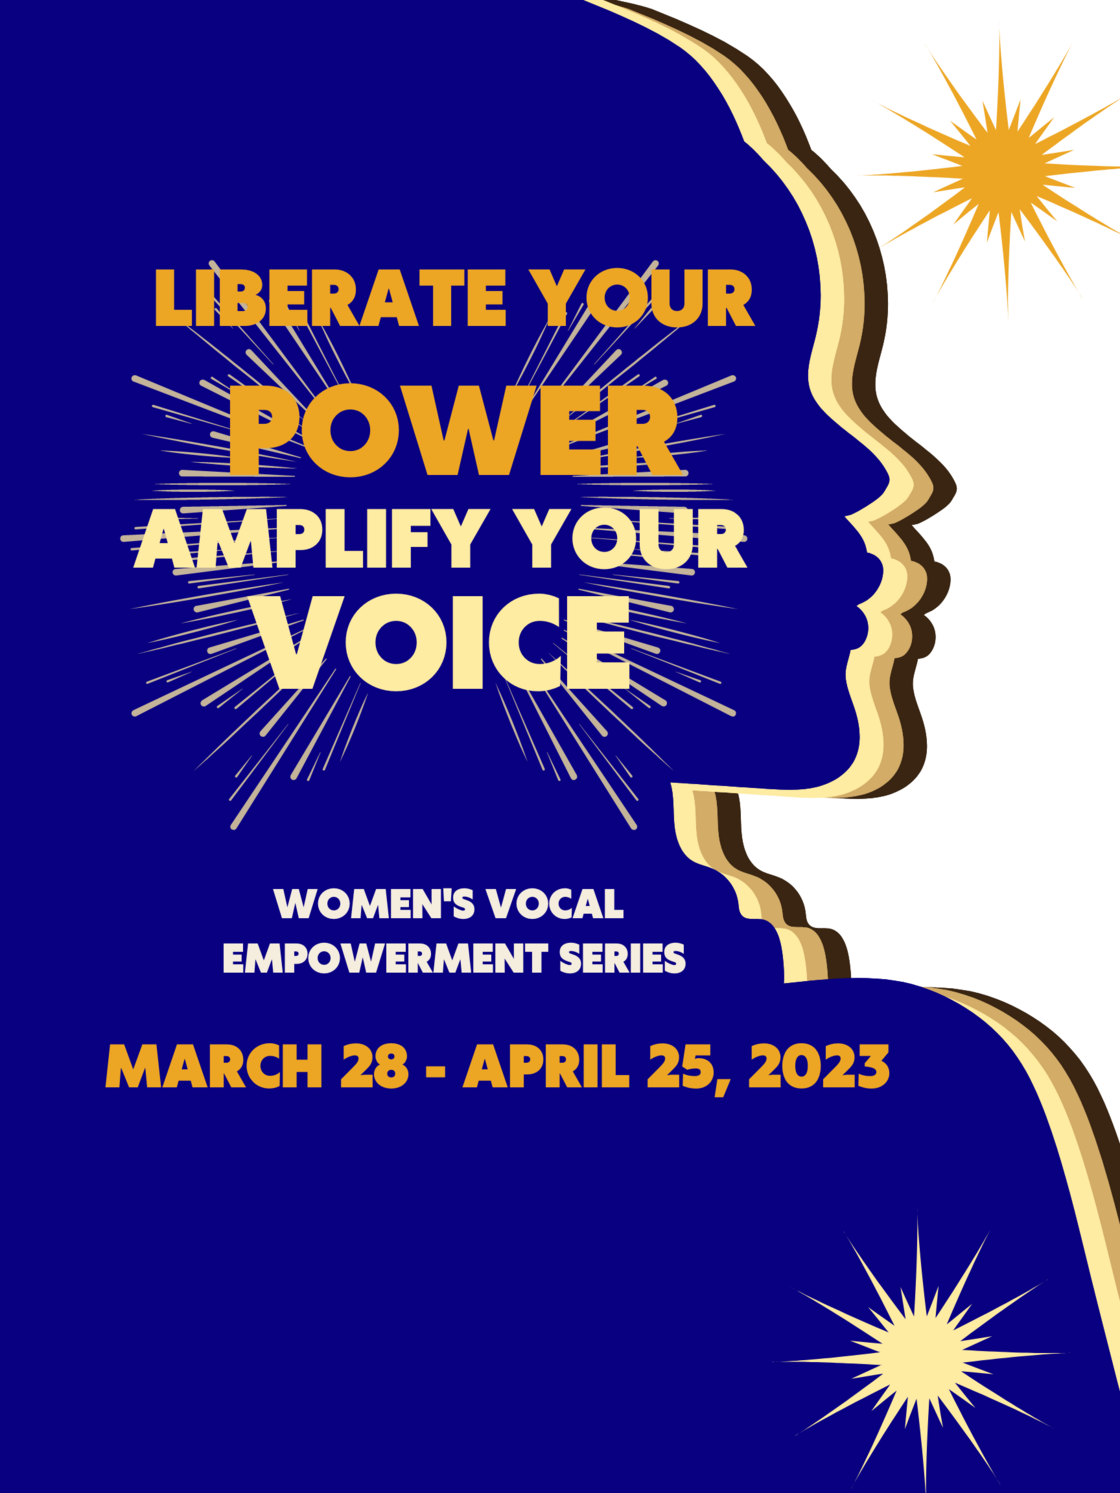 Woman’s Voice Illustrated Brown and Yellow Poster